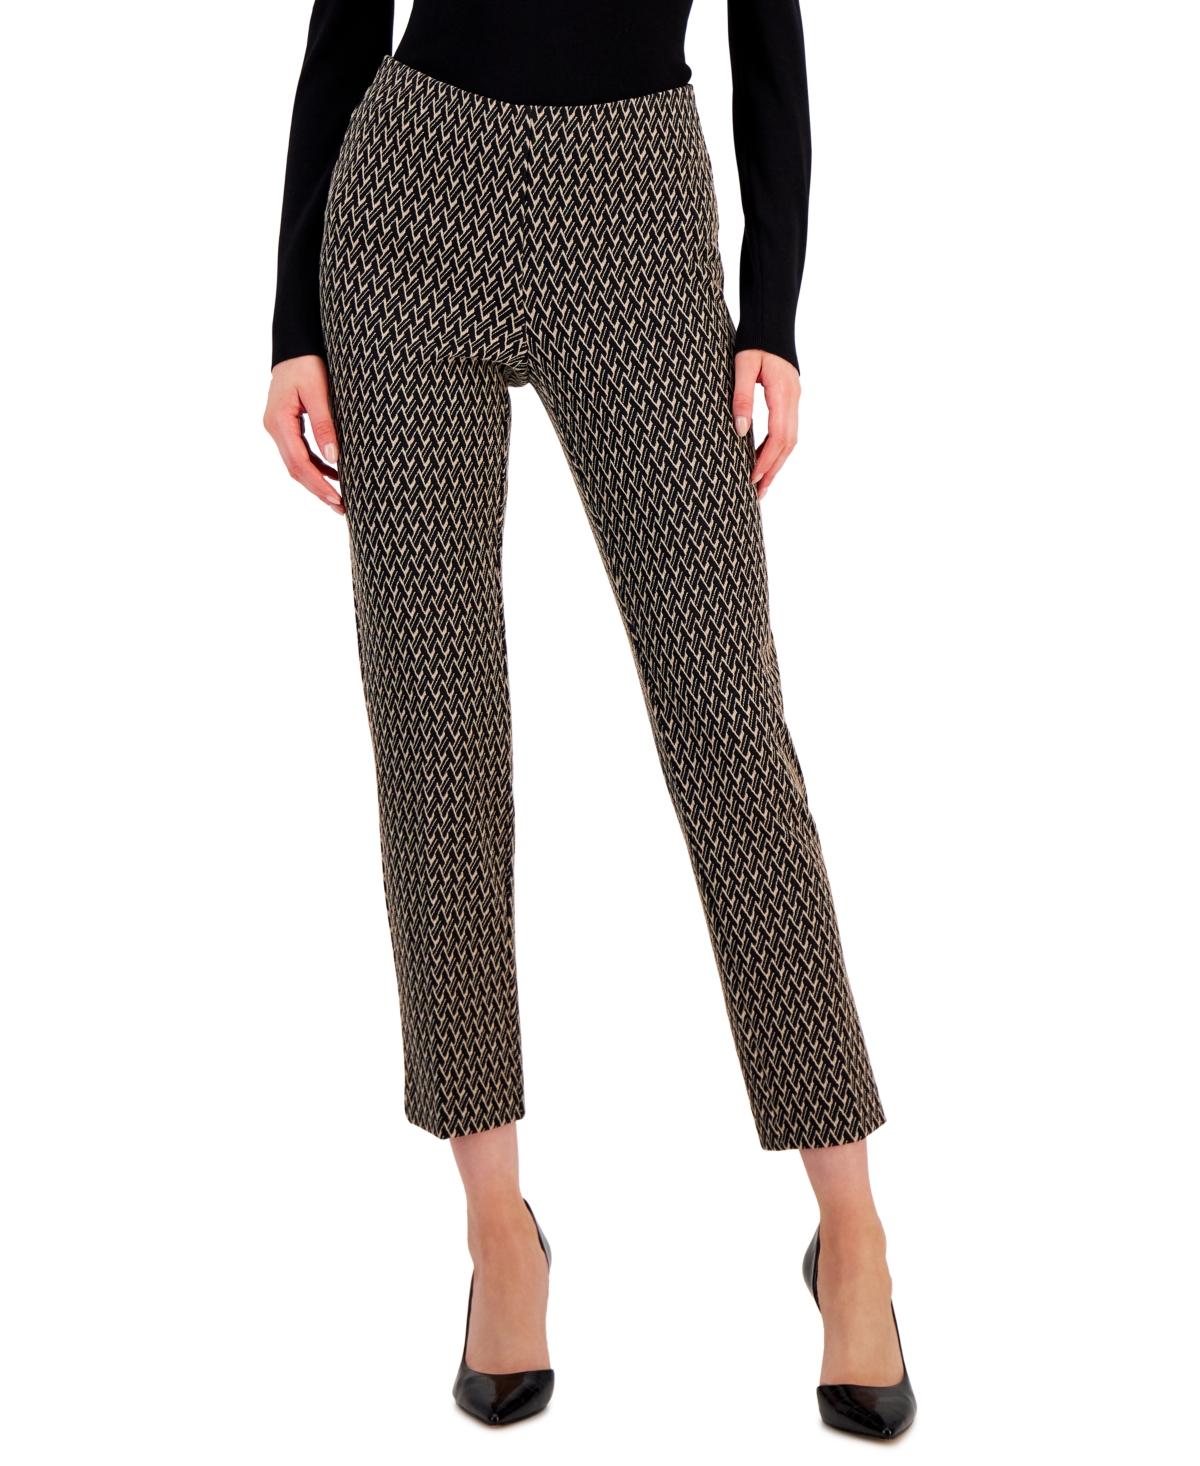 Anne Klein Women's Printed Hollywood Waist Pull-On Ankle Pants